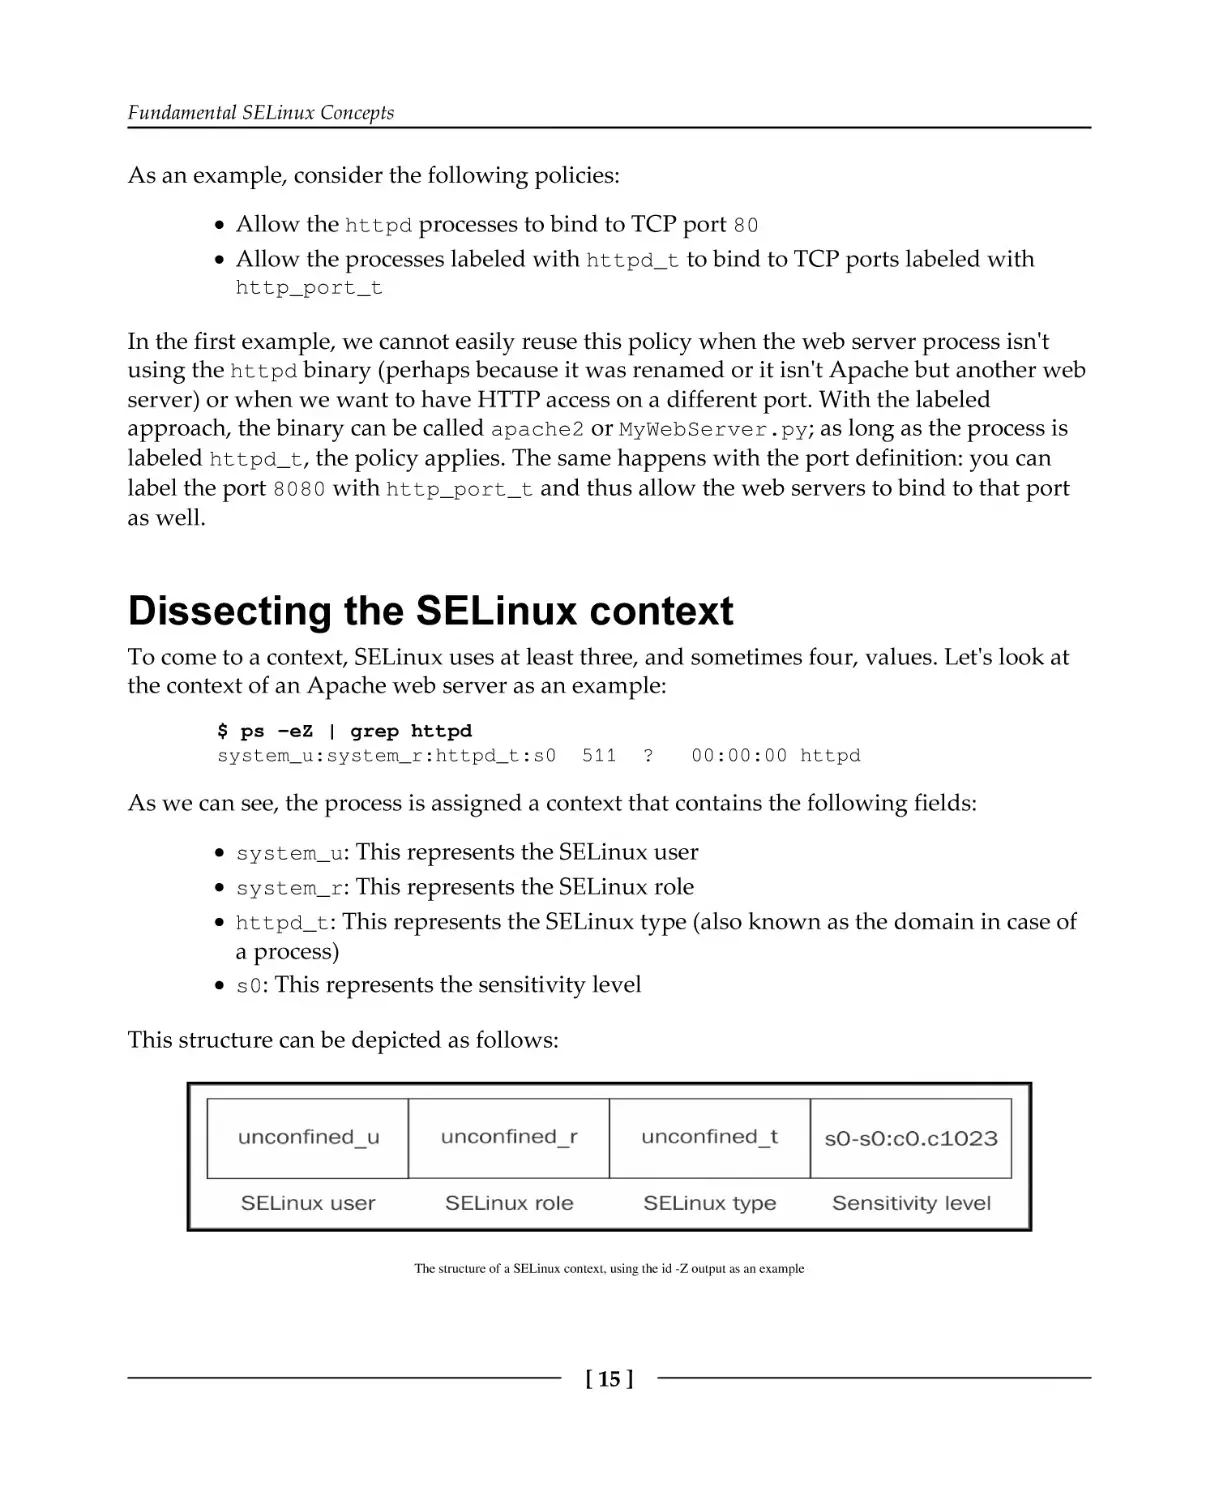 Dissecting the SELinux context